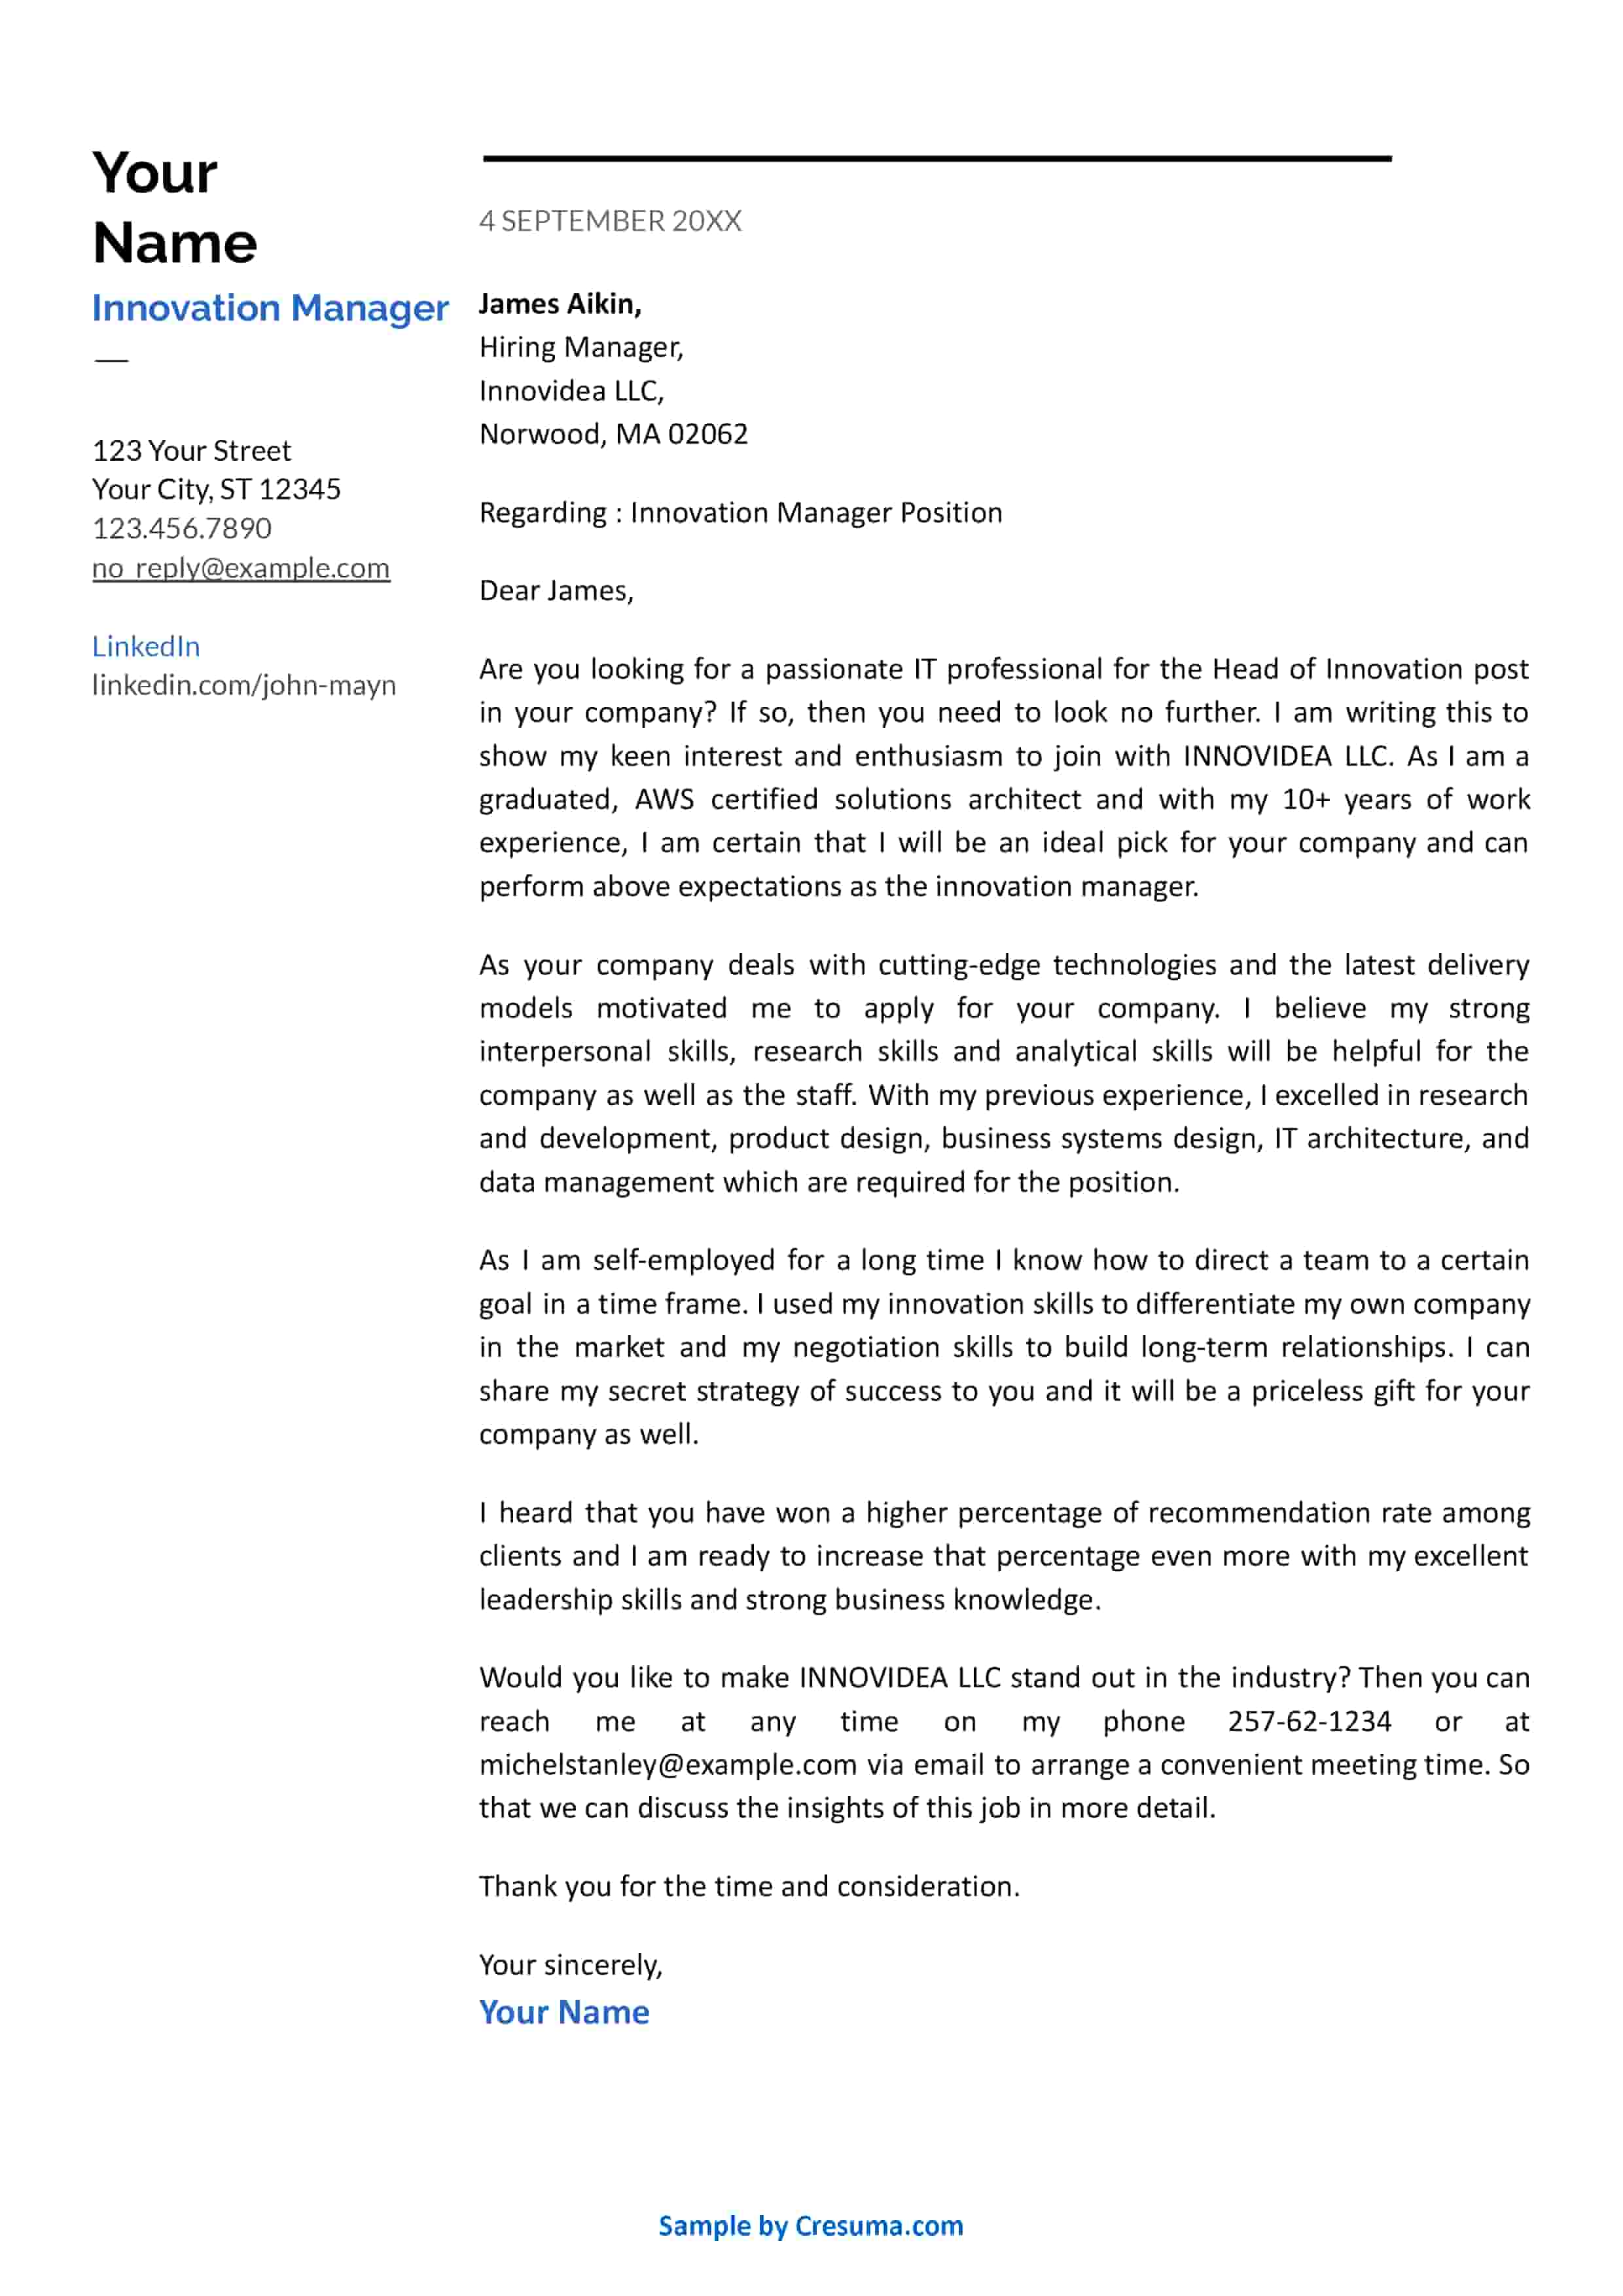 Innovation Manager cover letter example template 2